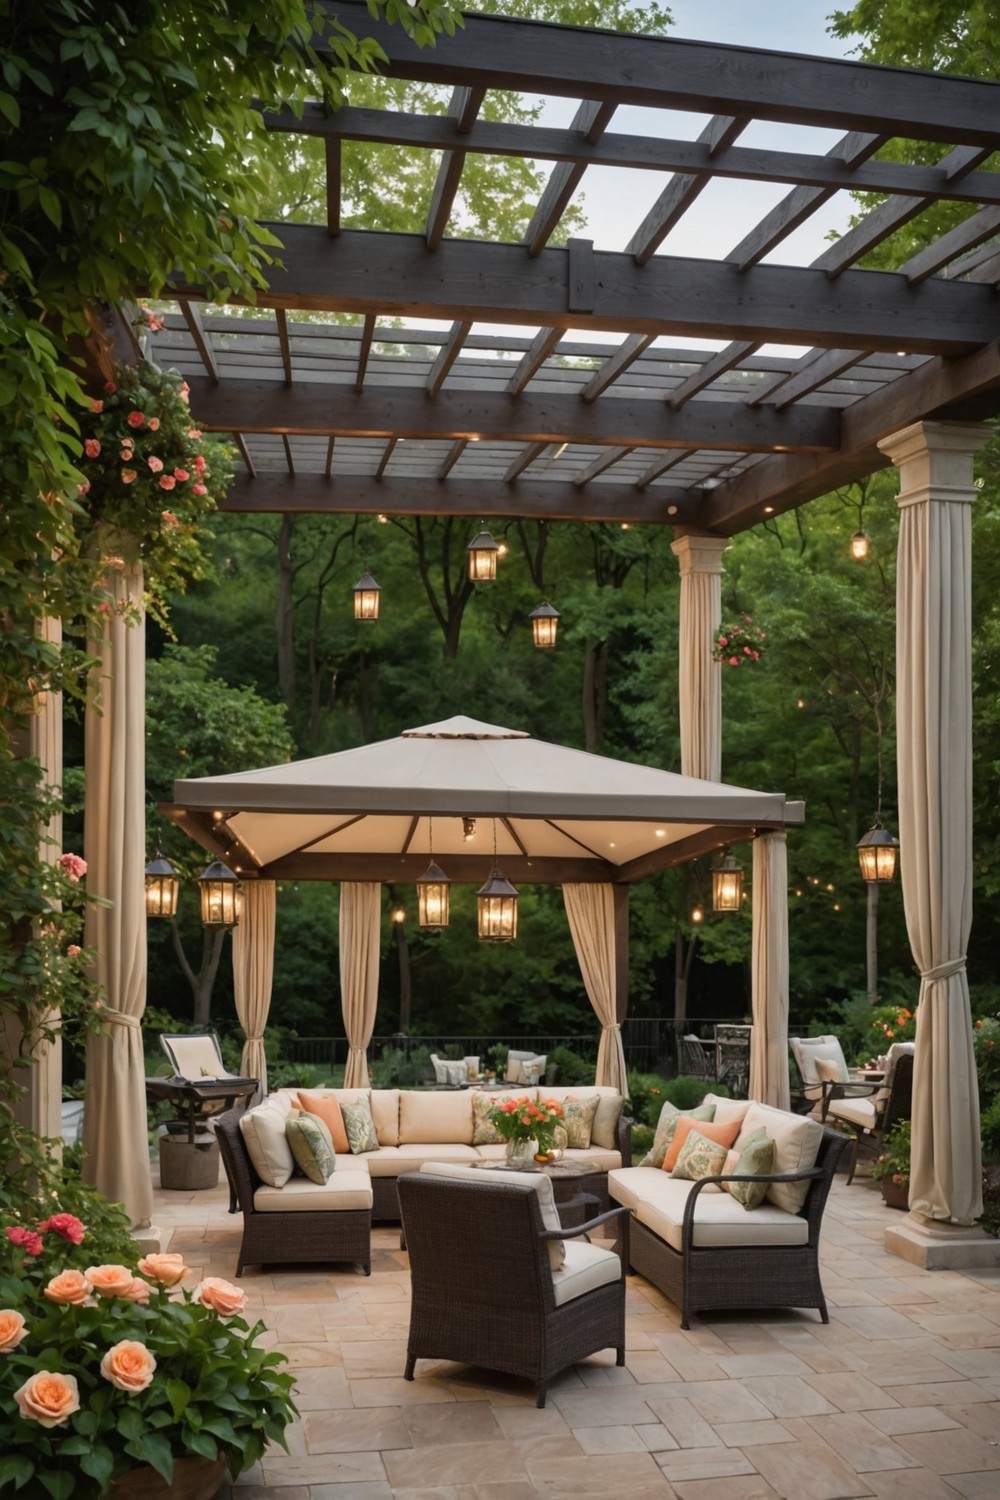 Gazebo-Style Pergola with Screens and Awnings